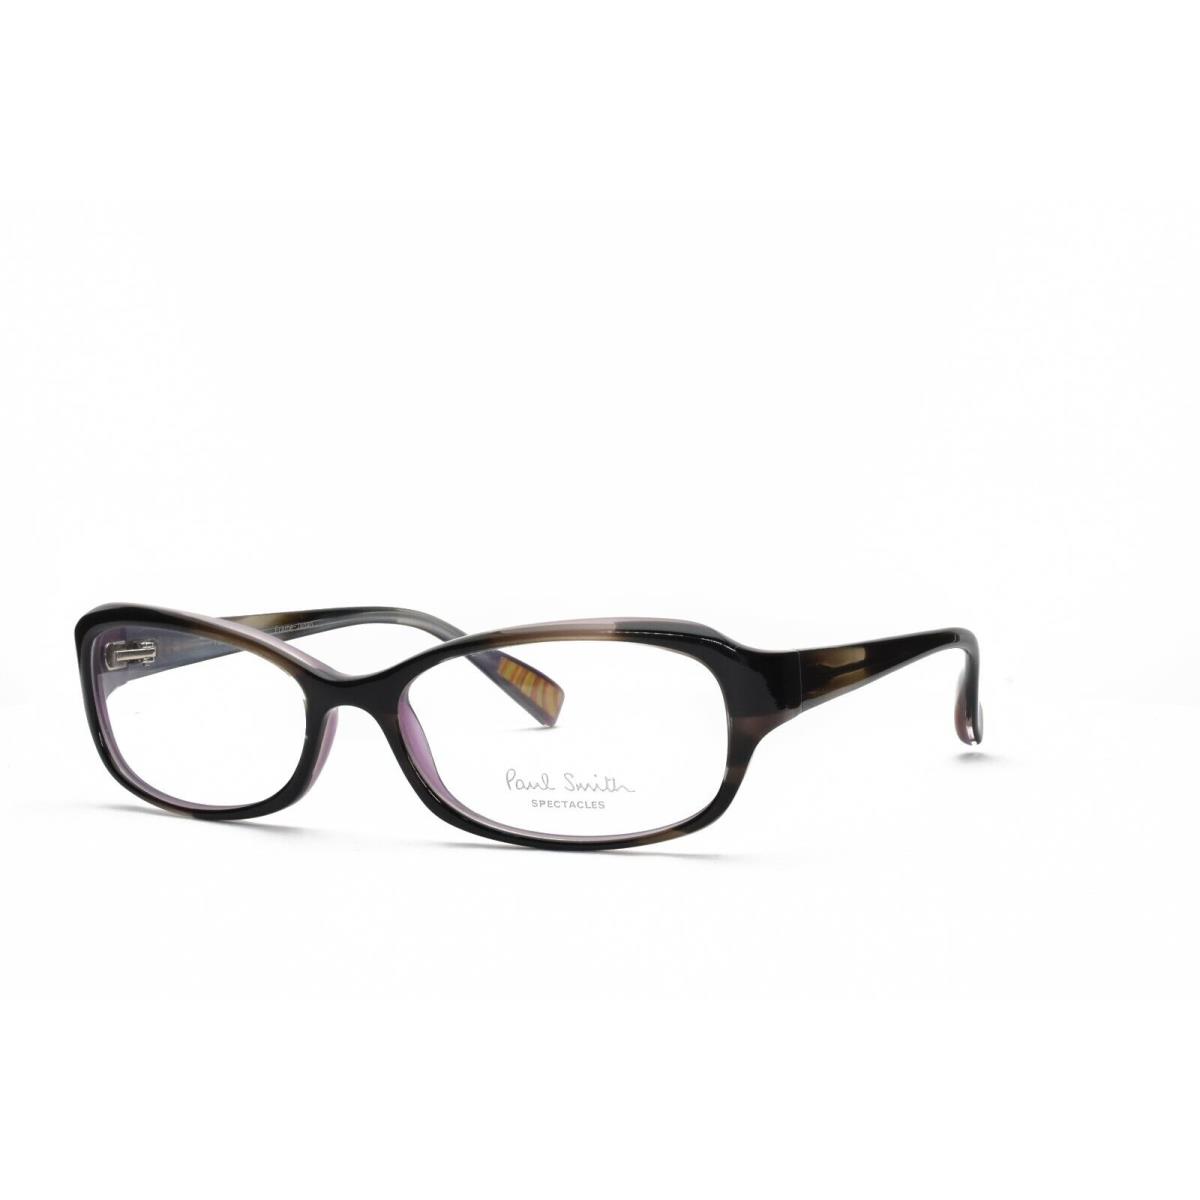 Paul Smith PS 289 Bhpl Eyeglasses Frames Only 53-17-130